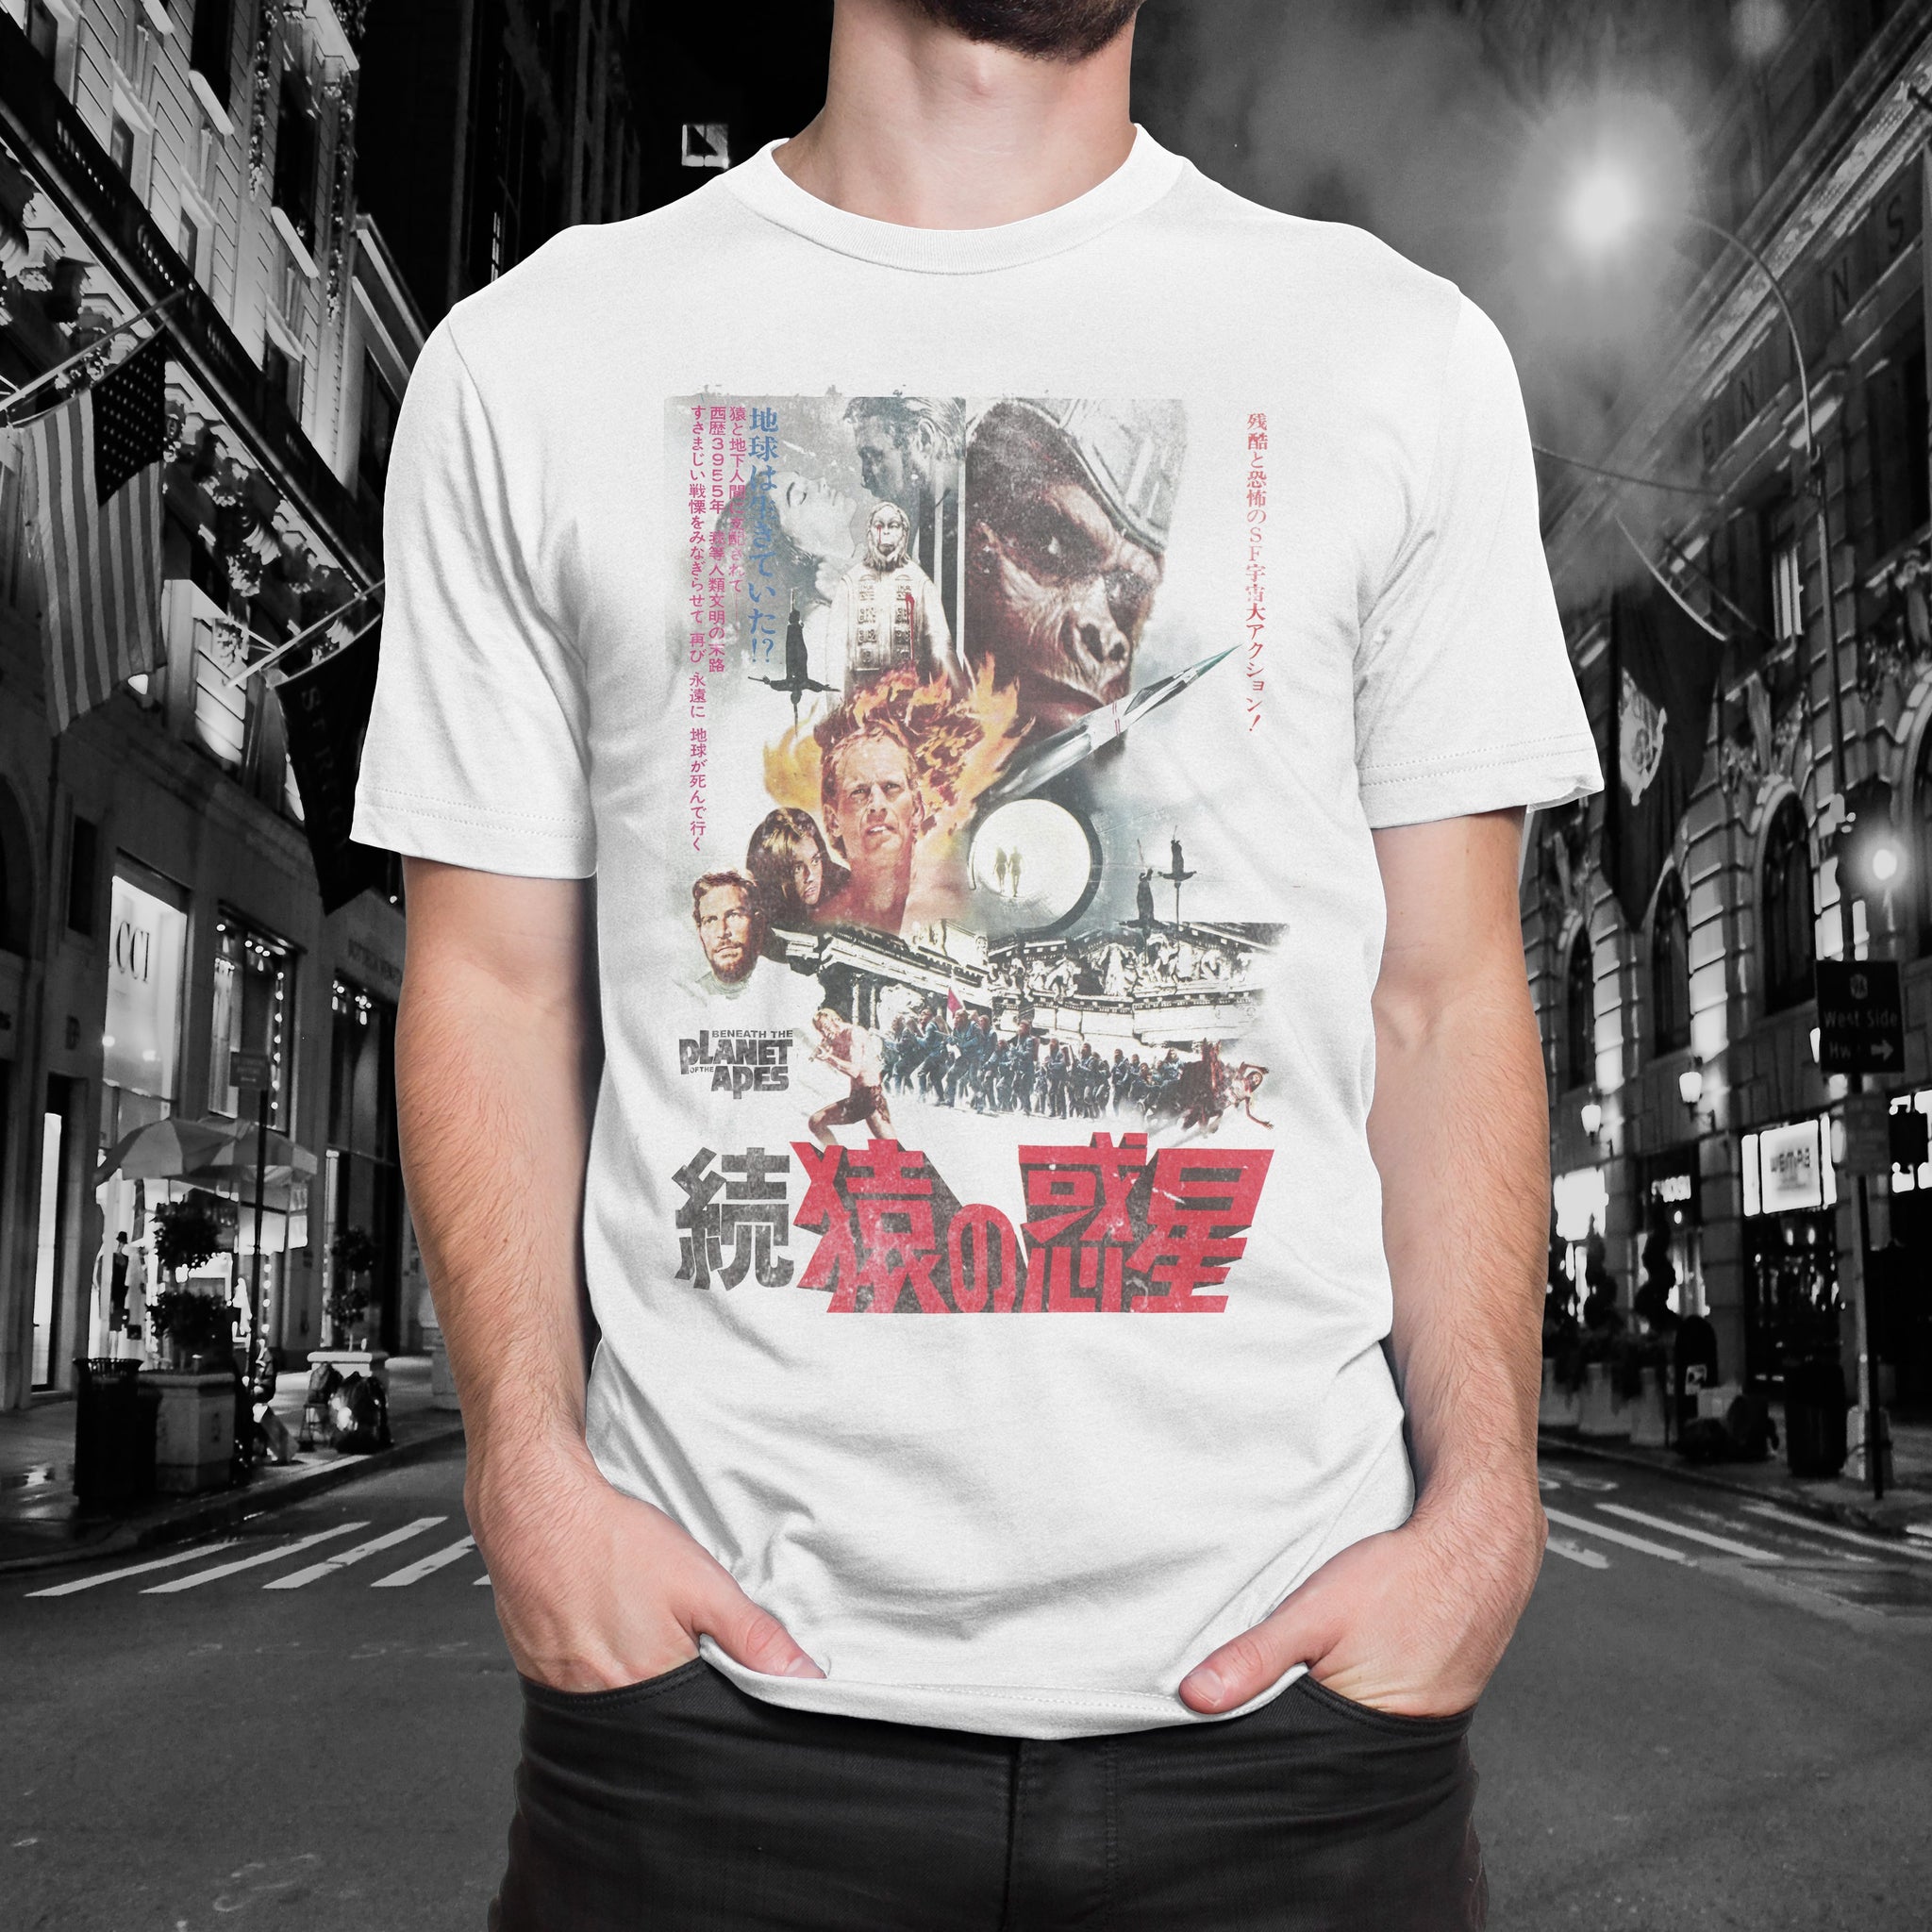 Beneath the Planet of the Apes "Japan" Tee